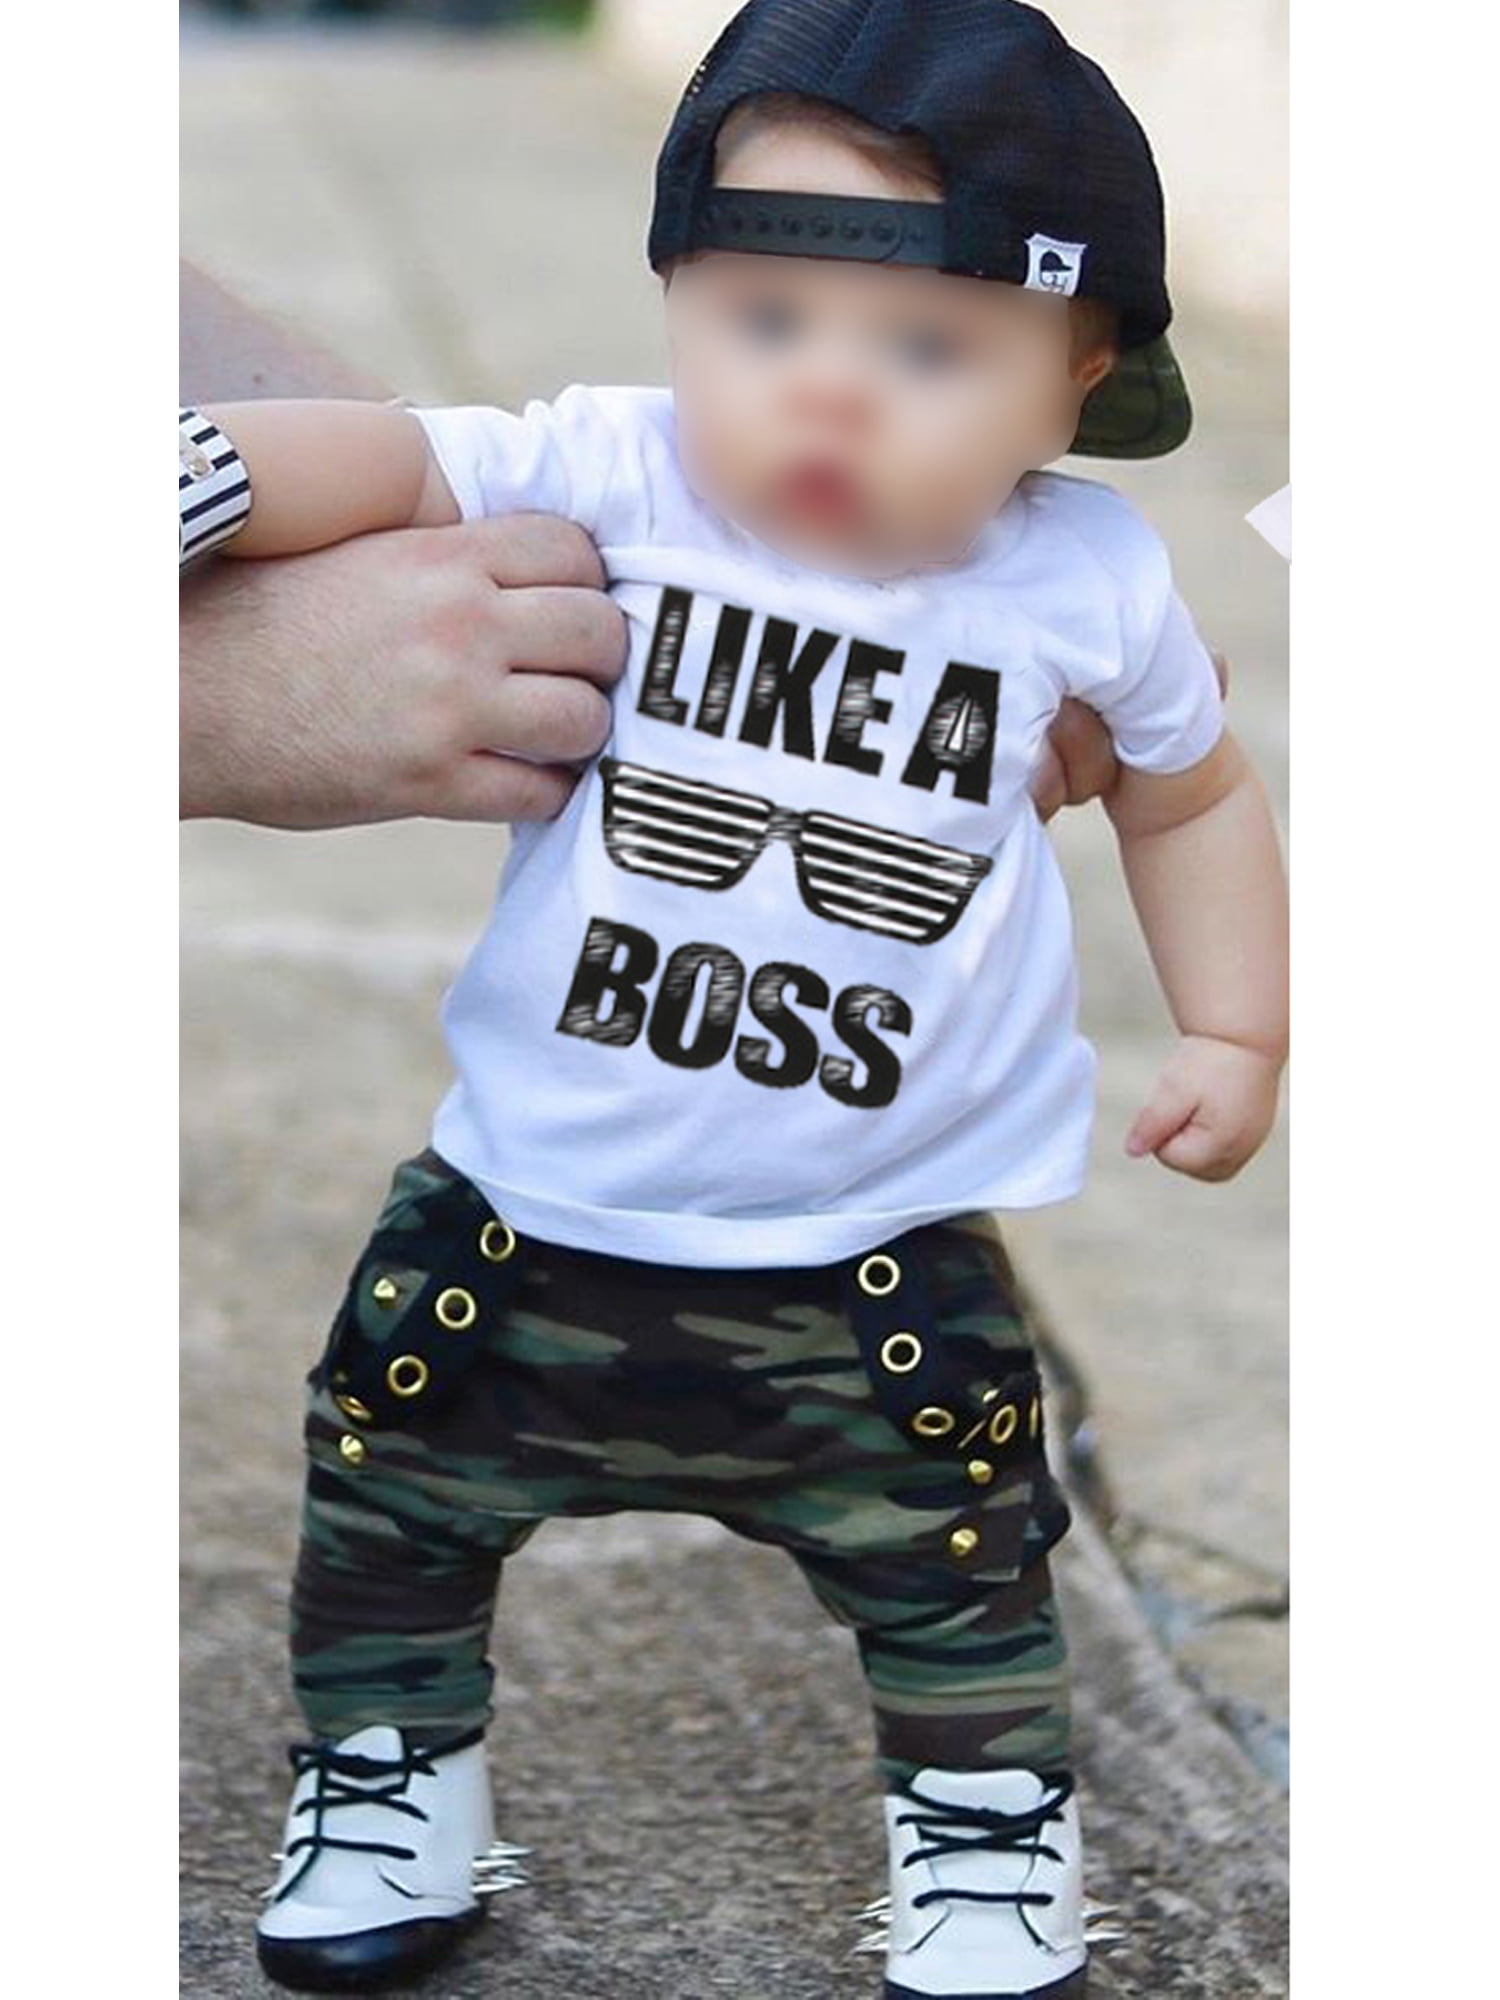 2PC Toddler Newborn Baby Boy Camouflage Hooded Shirt Tops Pants Outfits Clothes 